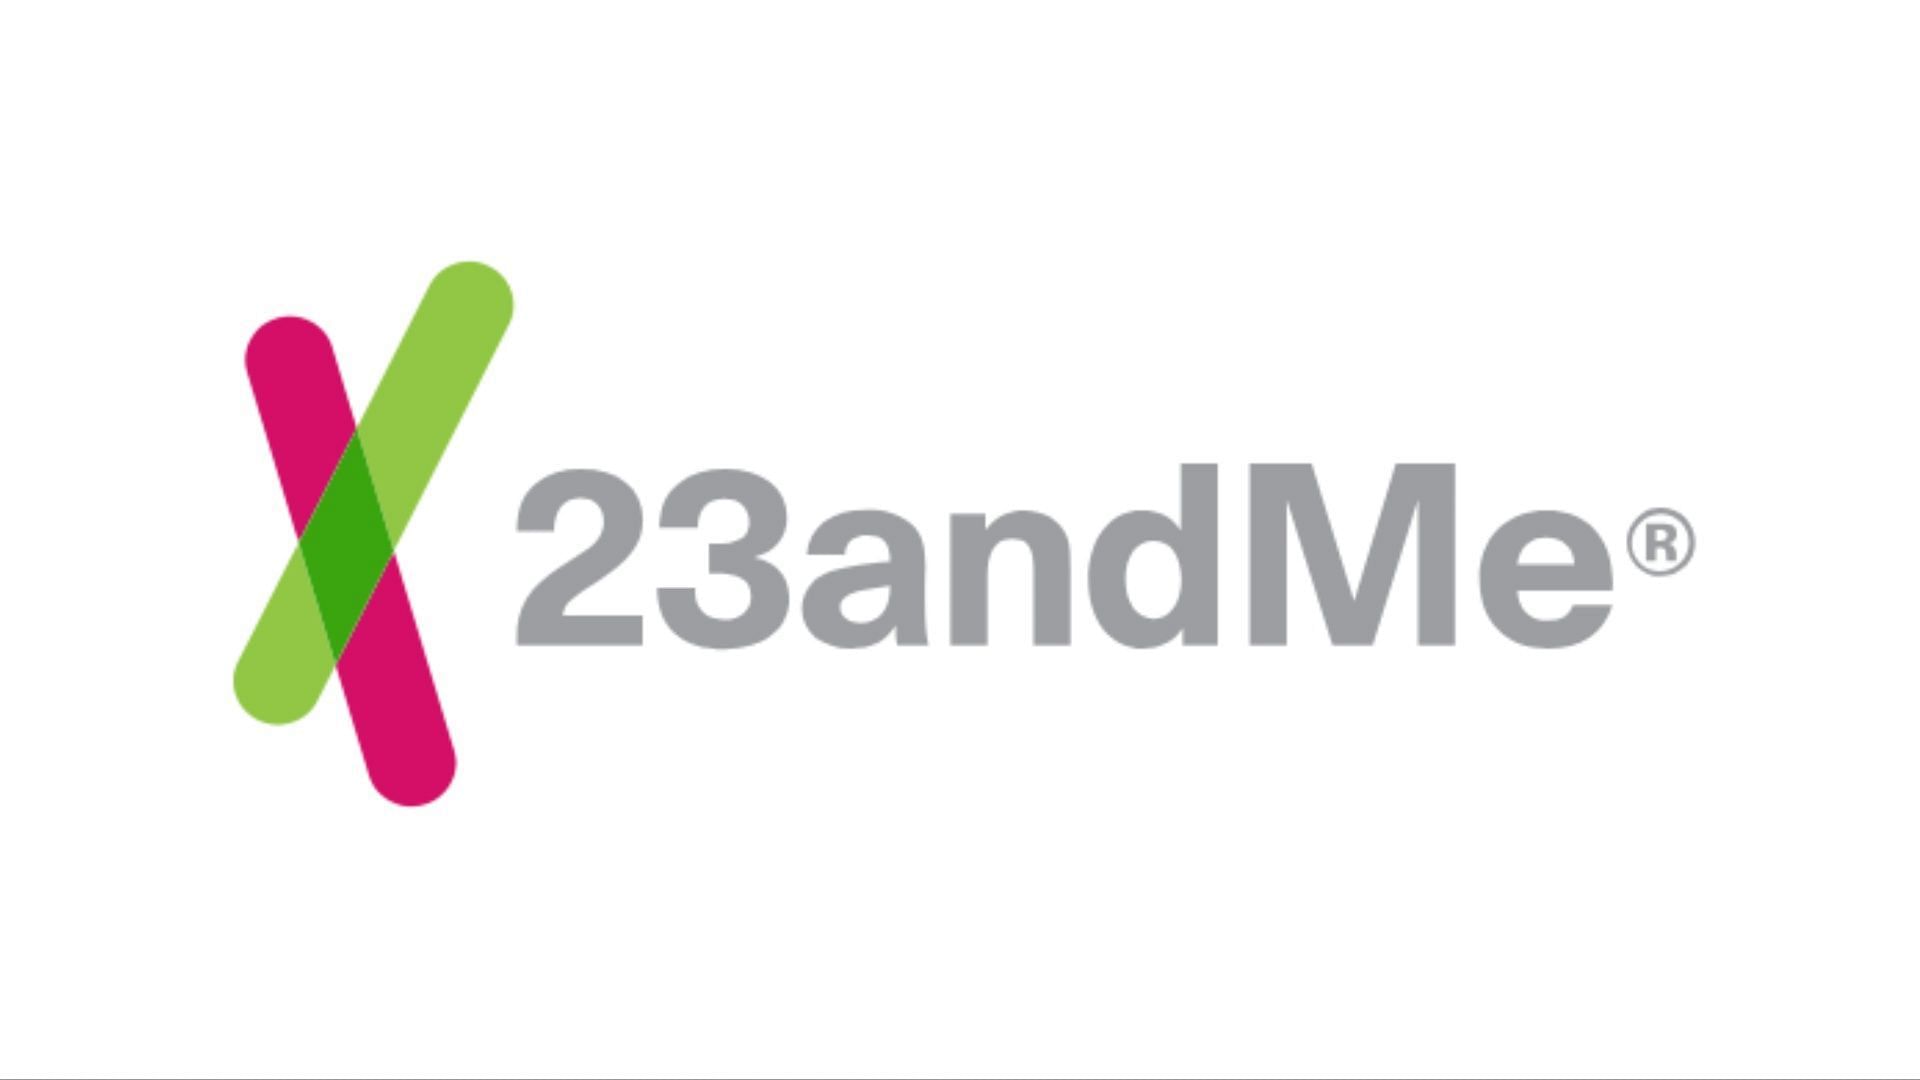 23andMe ancestry data of 6.9 million customers was breached in October (Image via 23andMe)